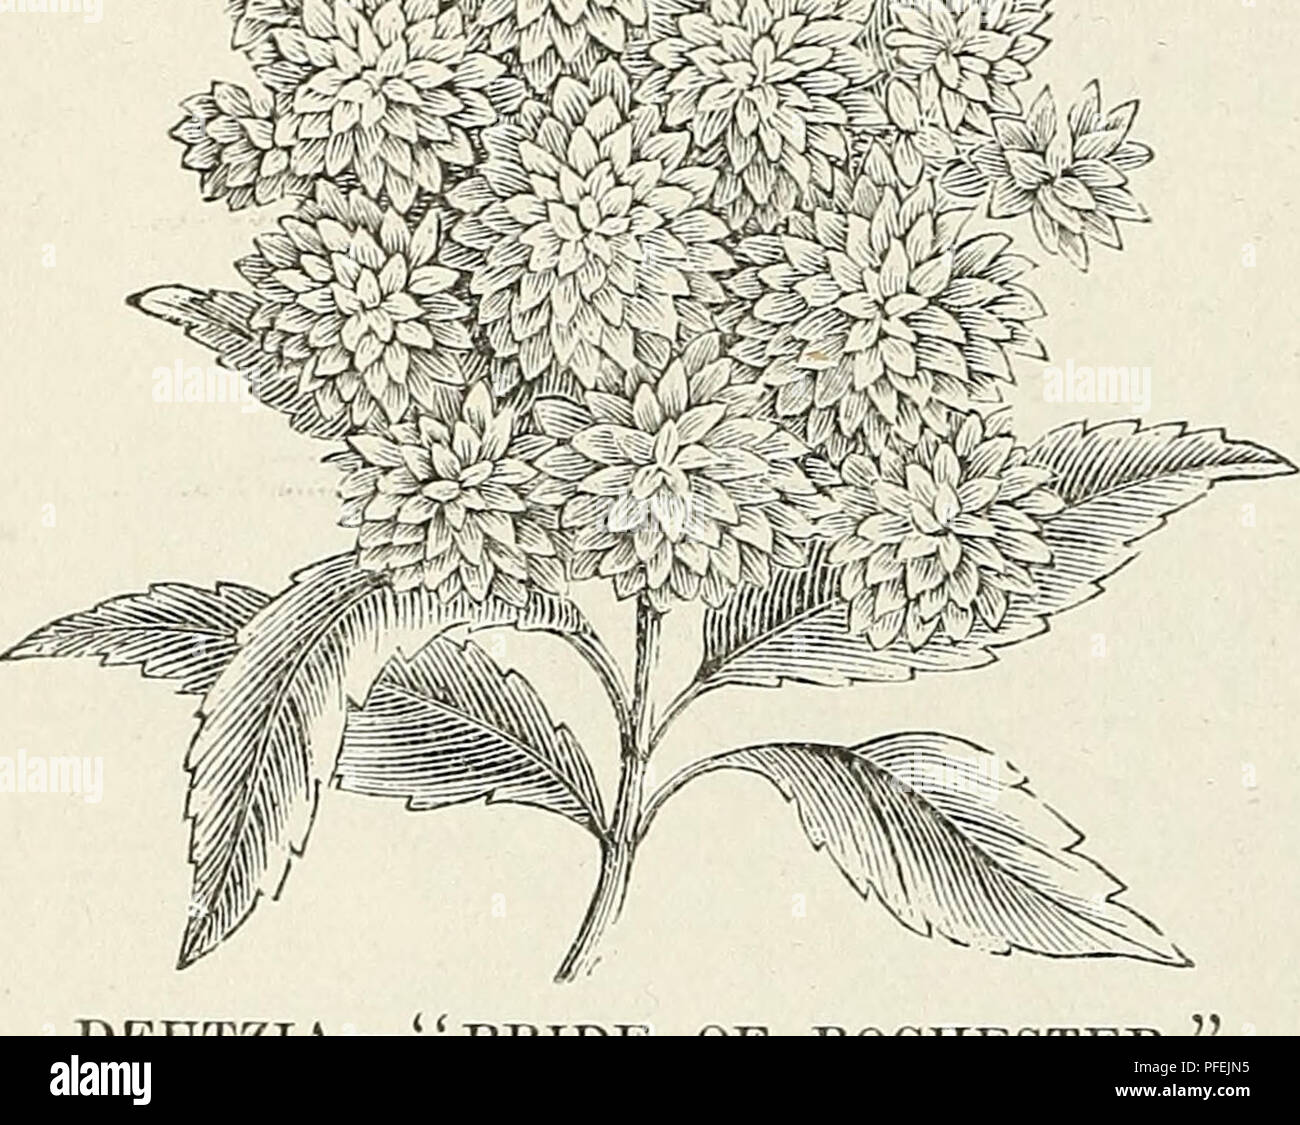 . Descriptive catalogue of ornamental trees, shrubs, hardy perennial plants, etc. : twenty-fifth edition. Ornamental trees Catalogs; Shrubs Catalogs; Roses Catalogs; Flowers Catalogs. If. DEUTZIA—&quot; PRIDE OF ROCHESTER. (&gt;3 Natural, Size.) D. c. var. flore alba pleiio. Similar in habit to the preceding, but pure white and double. var. &quot;Pride of Roches- ter.&quot; A variety raised from Deutzia crenata flore pleno, and producing large double white flowers; the back of the petals being slightly tinged with rose. It excels all of the older sorts in size of flower, length of panicle, pro Stock Photo